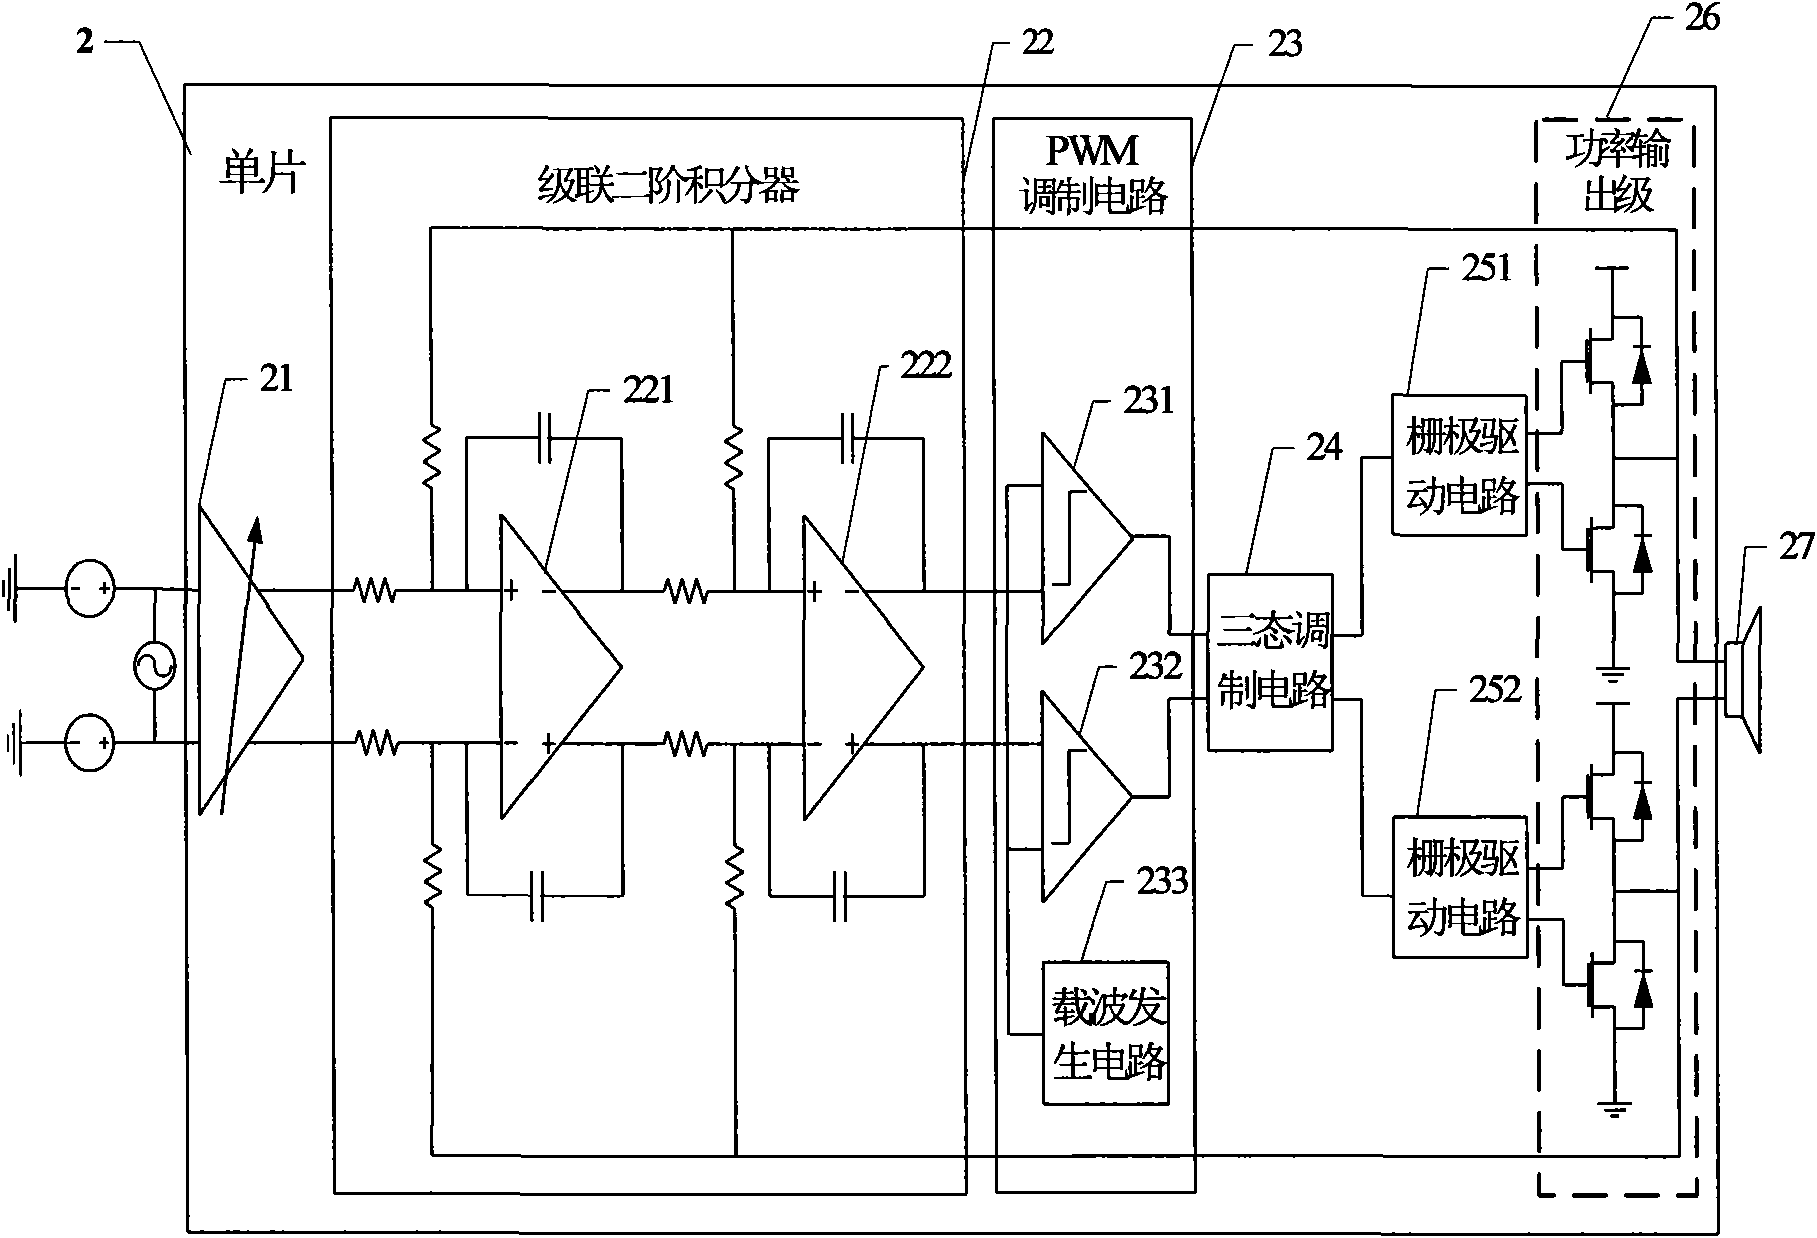 High-performance D type audio power amplifier with high-order multipath feedback structure